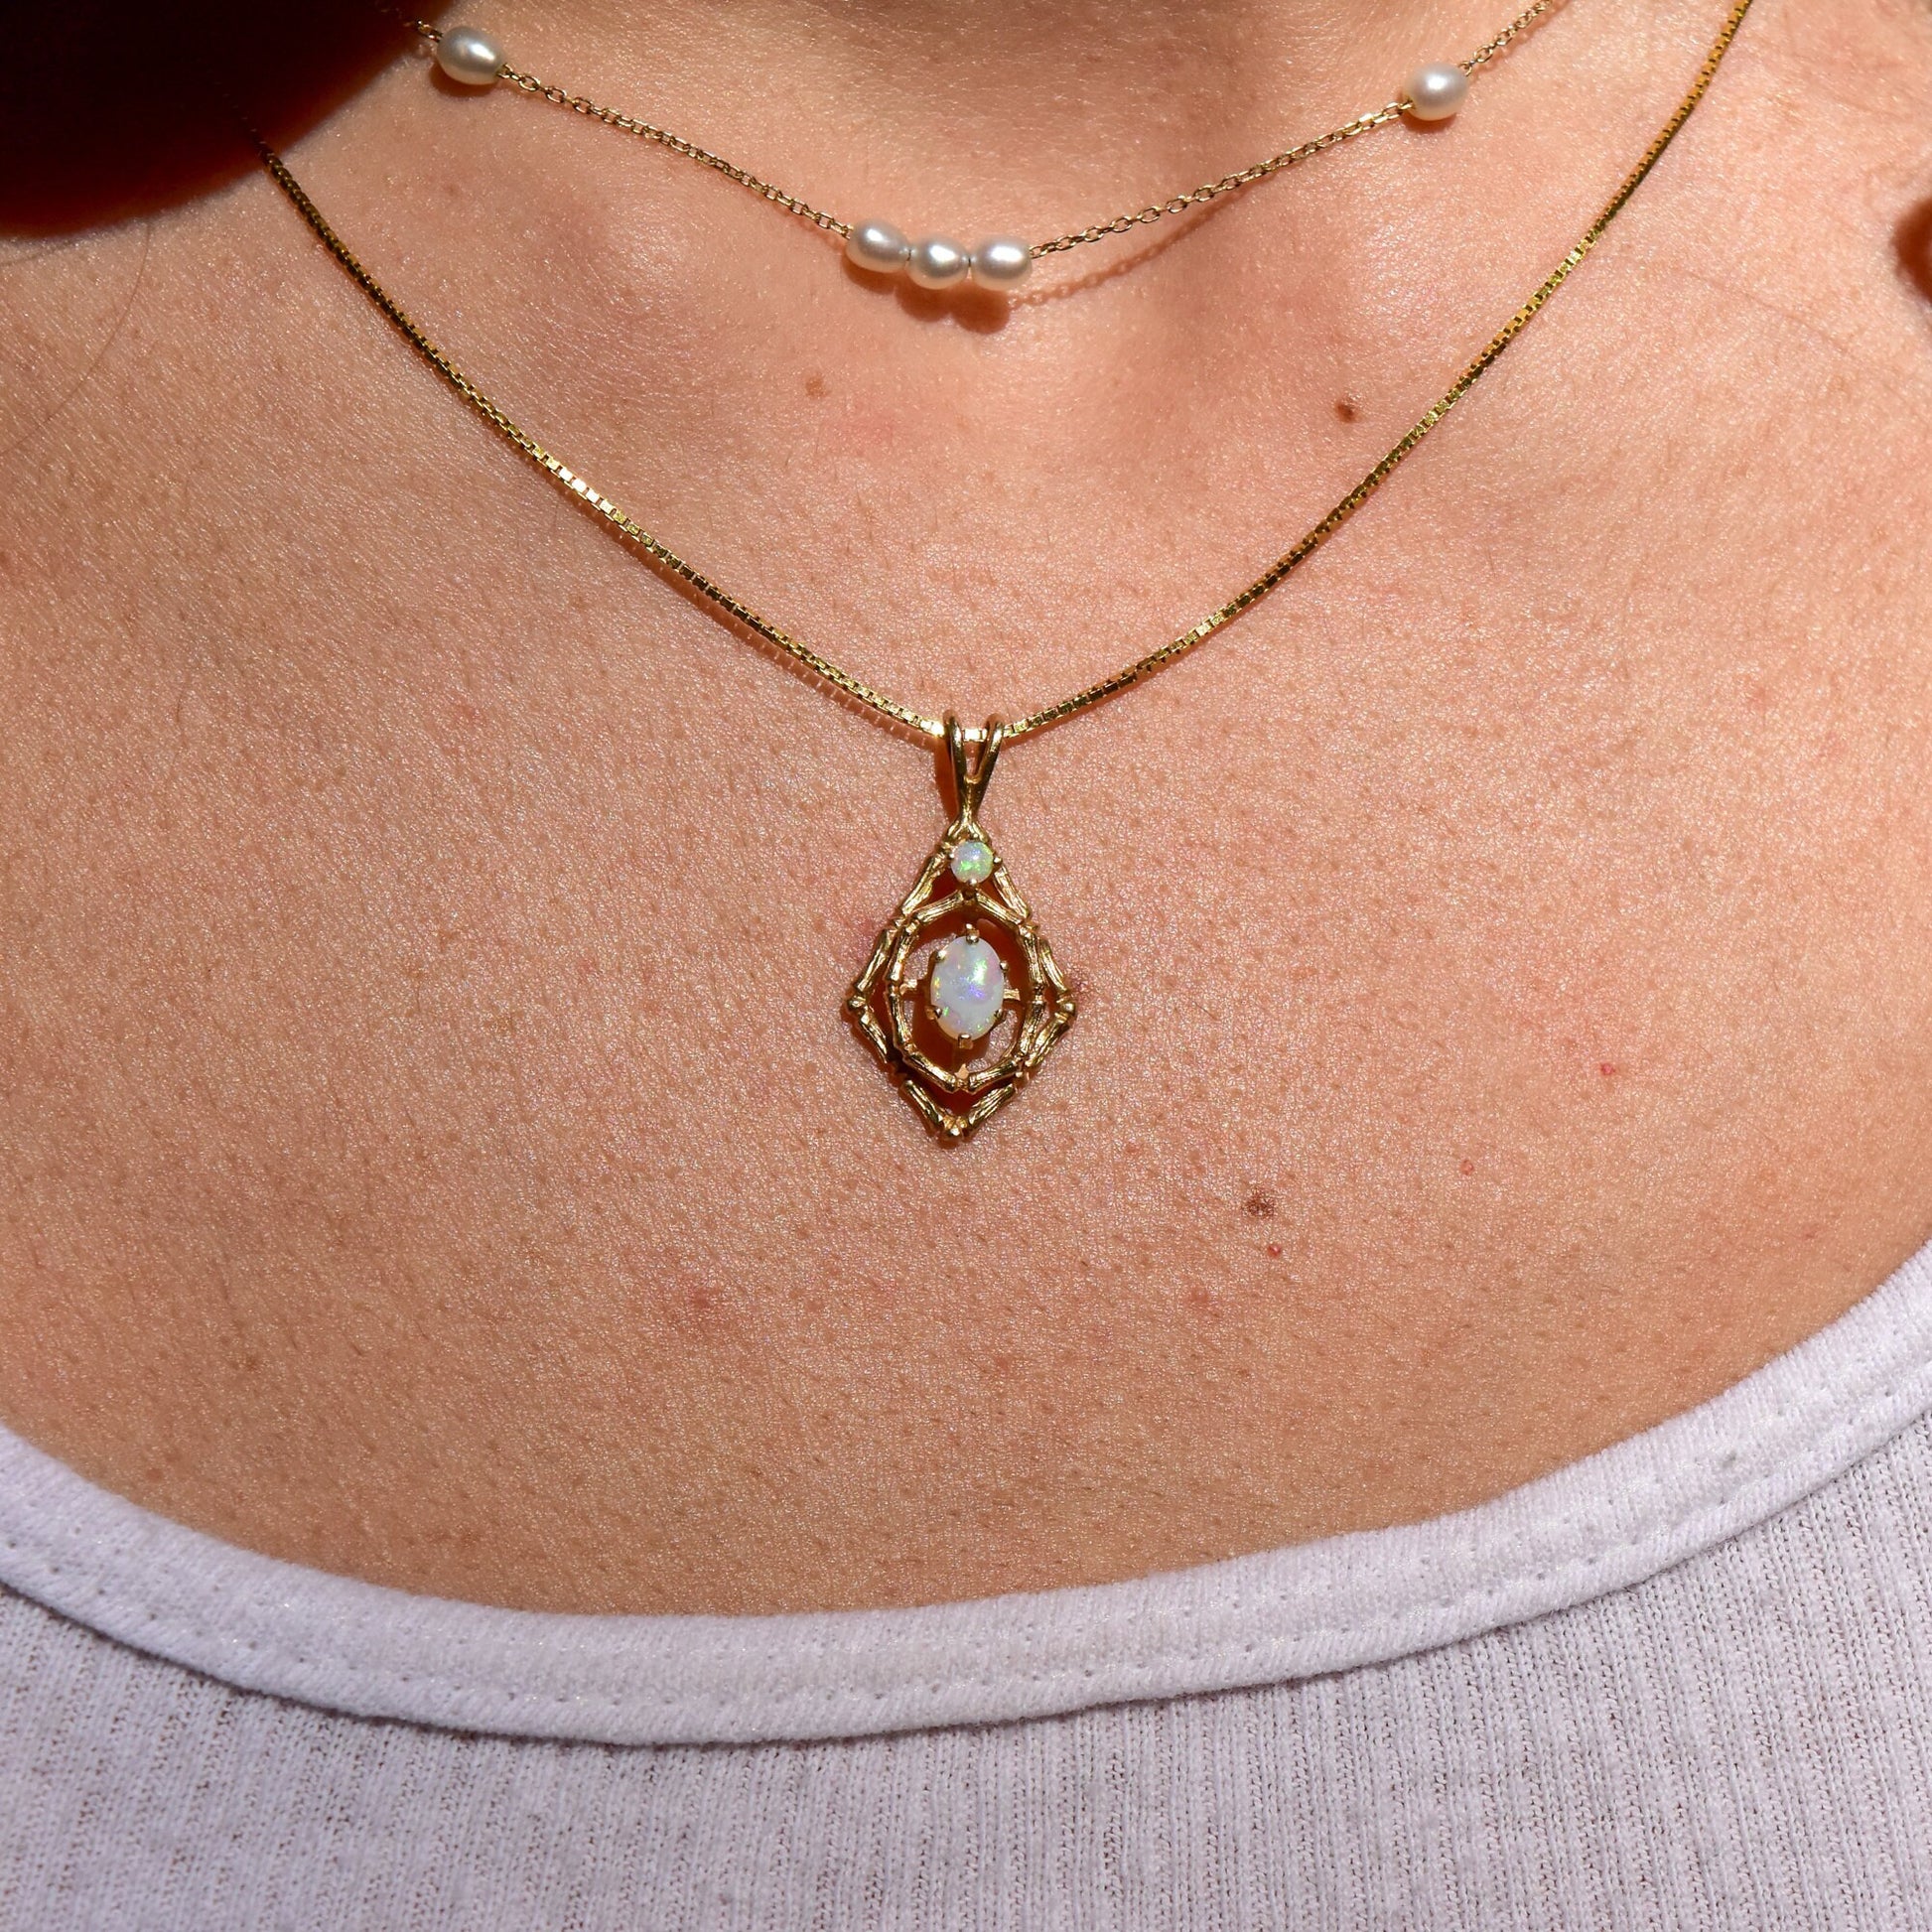 10K yellow gold pendant necklace featuring two white opal cabochon stones in an intricate bamboo-inspired design, displayed on a woman's neck against her skin.